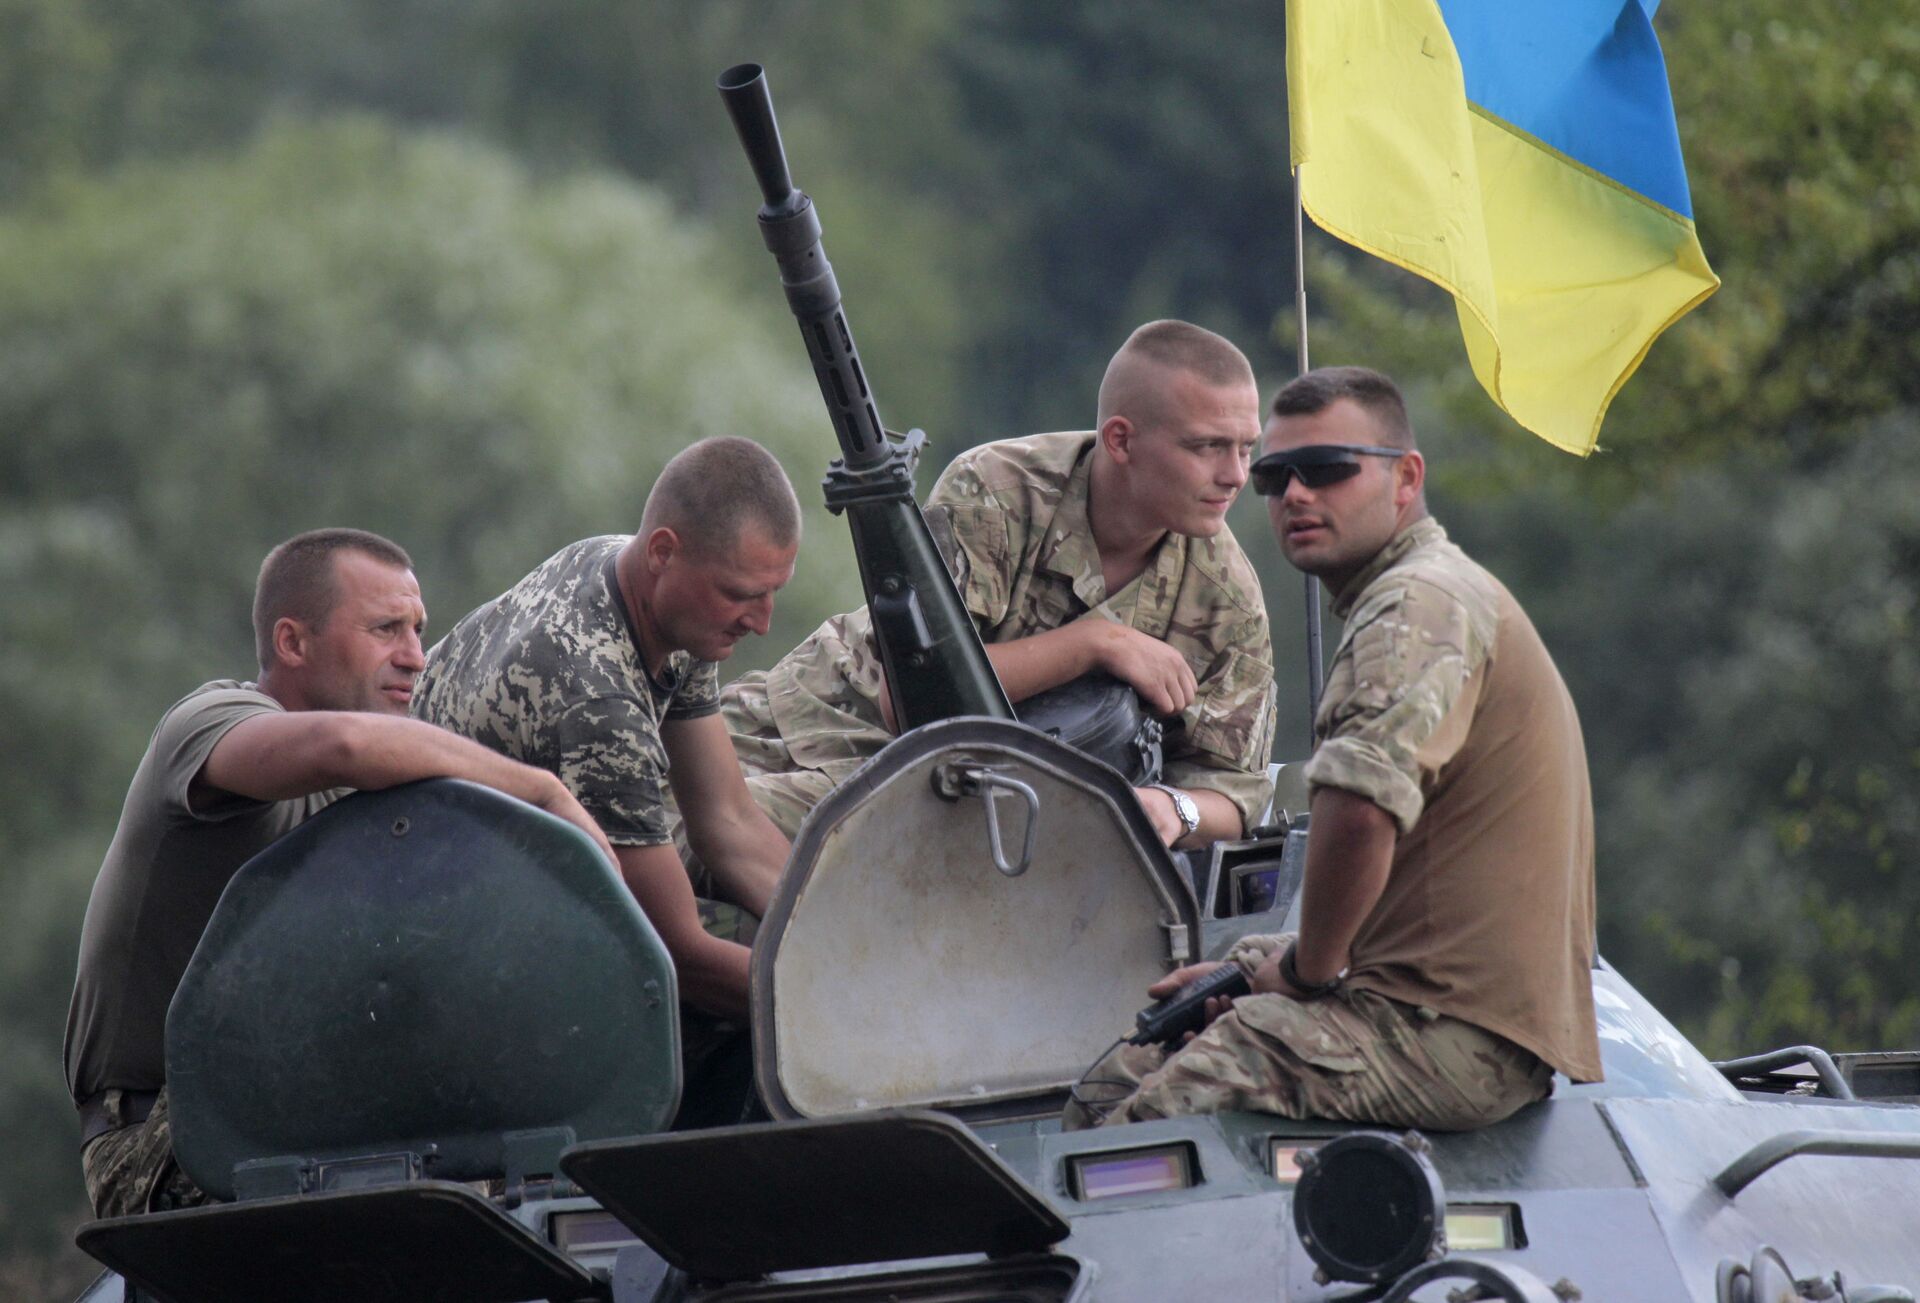 Ukrainian soldiers atop an APC watch training exercises under the supervision of British instructors on the military base outside Zhitomir, Ukraine, Tuesday, Aug. 11, 2015 - Sputnik International, 1920, 16.04.2022